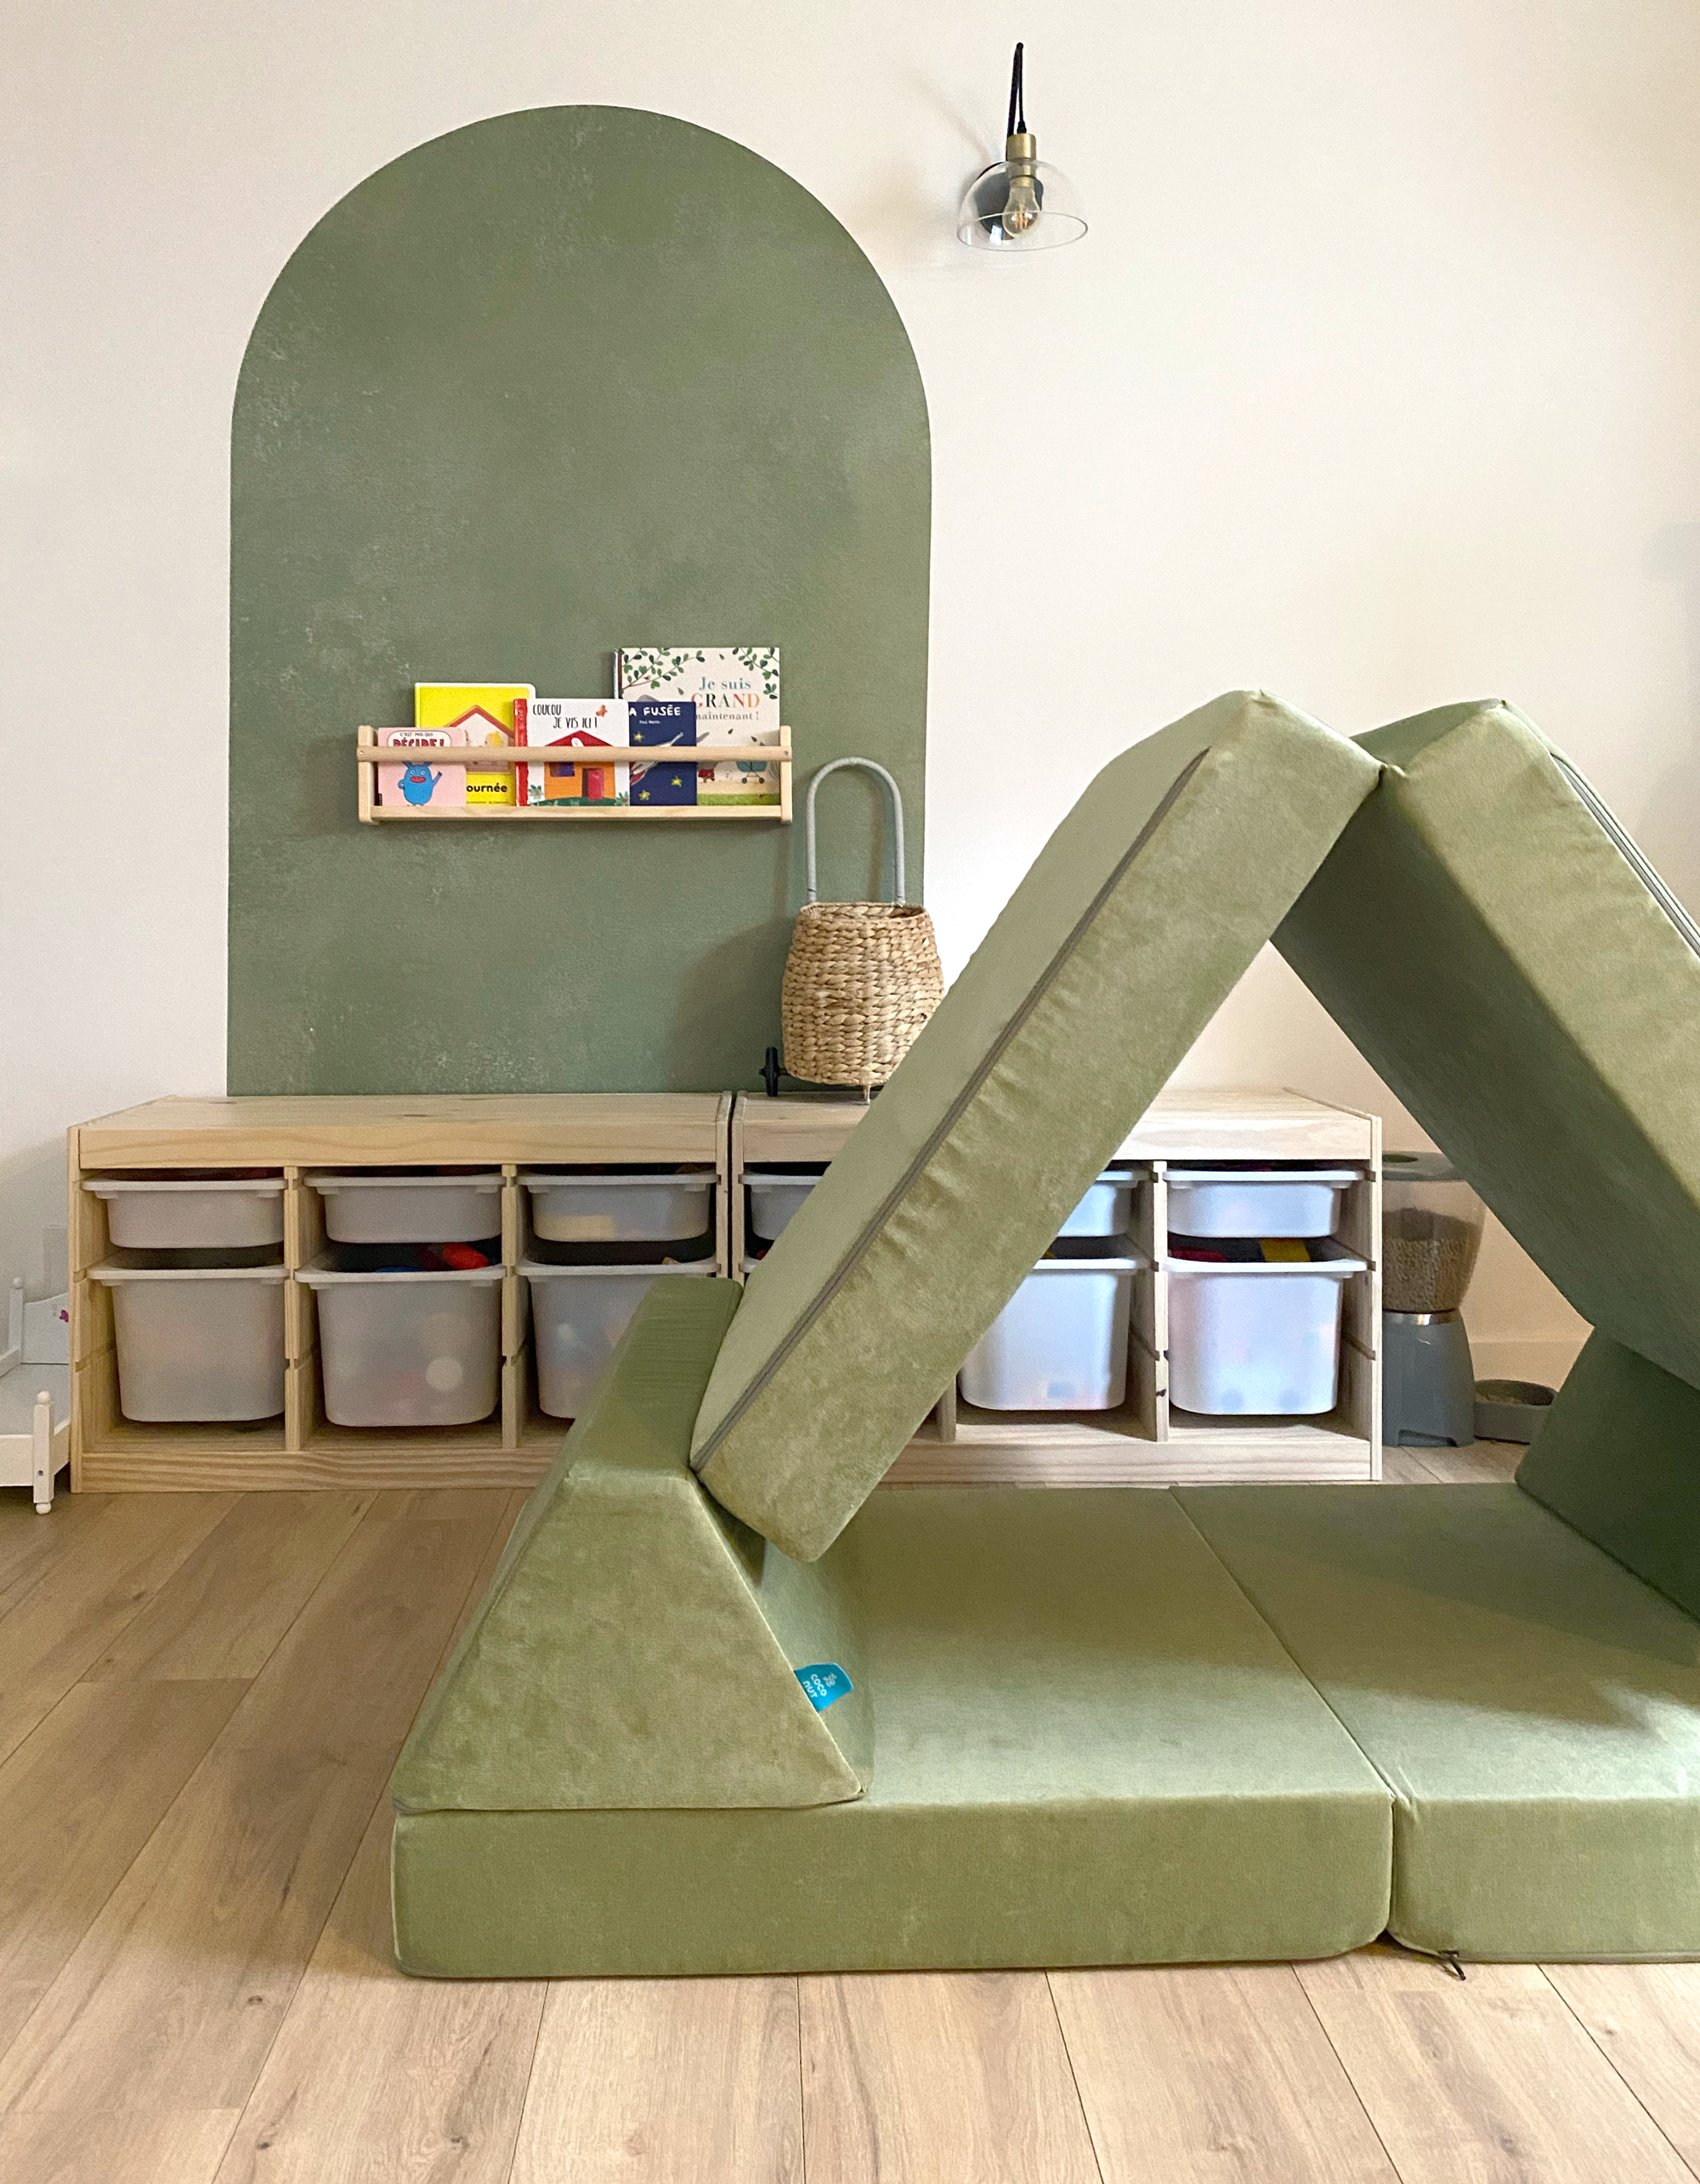 Is Having a Playroom for Your Children a good idea in reality?